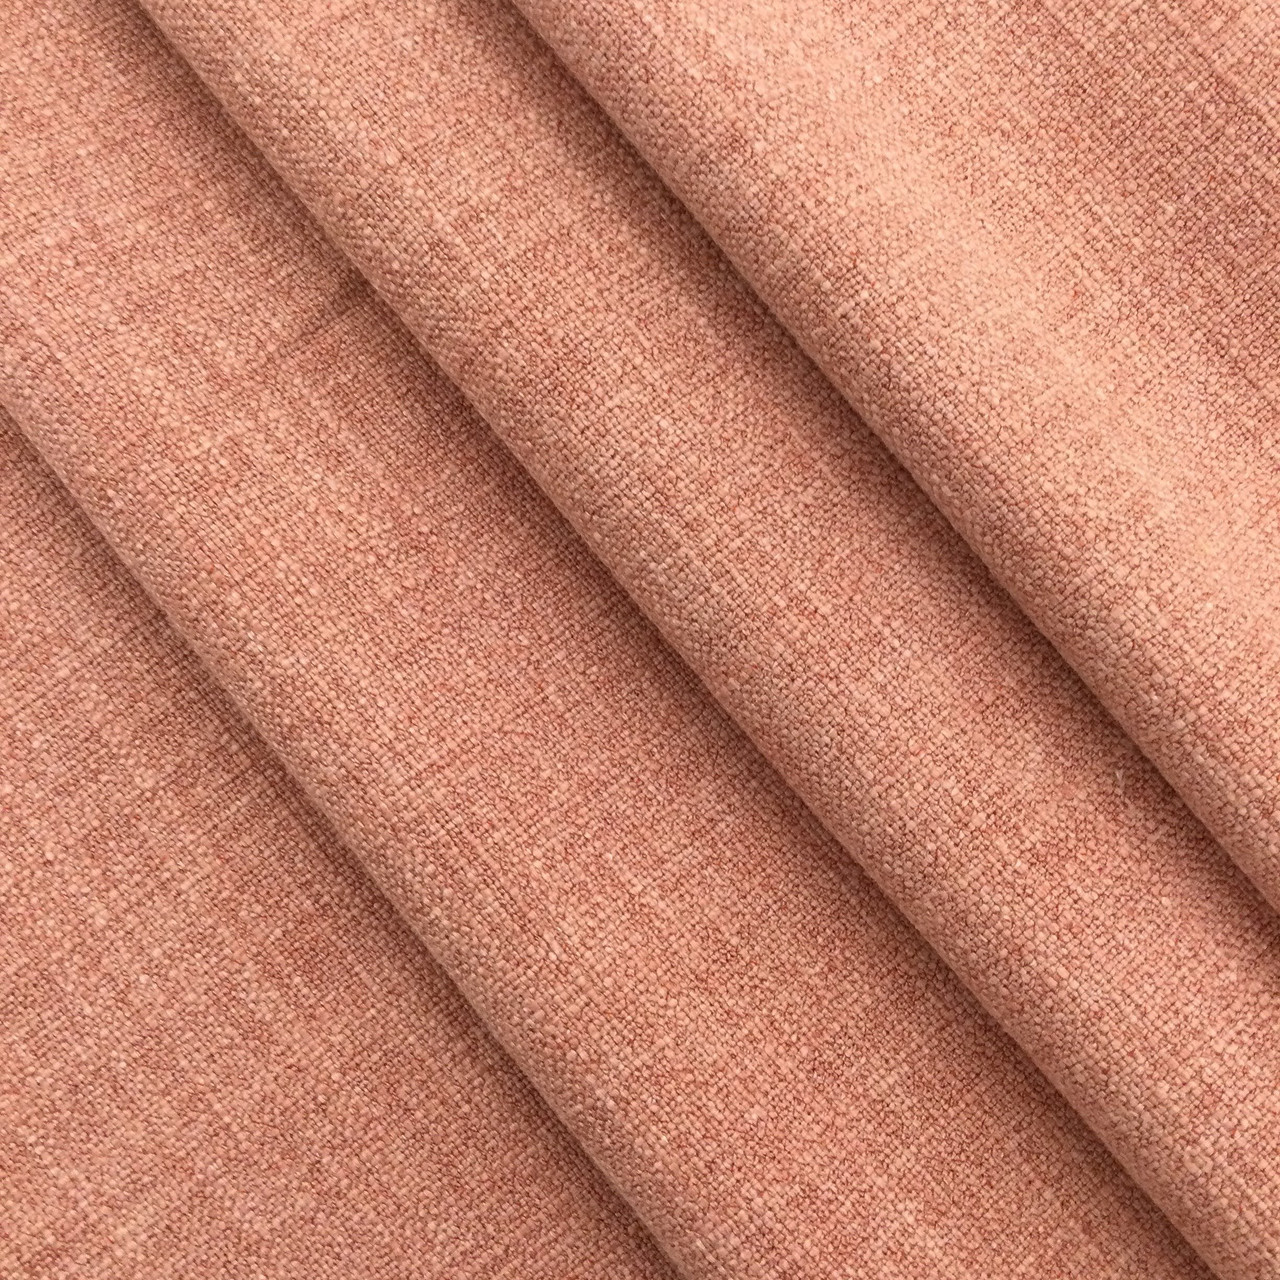 Linen Fabric Slub Weave in Blush Pink | Upholstery / Slipcovers / Curtains  | Poly / Cotton / Linen Blend | 55 Wide | By the Yard | Leslie Jee